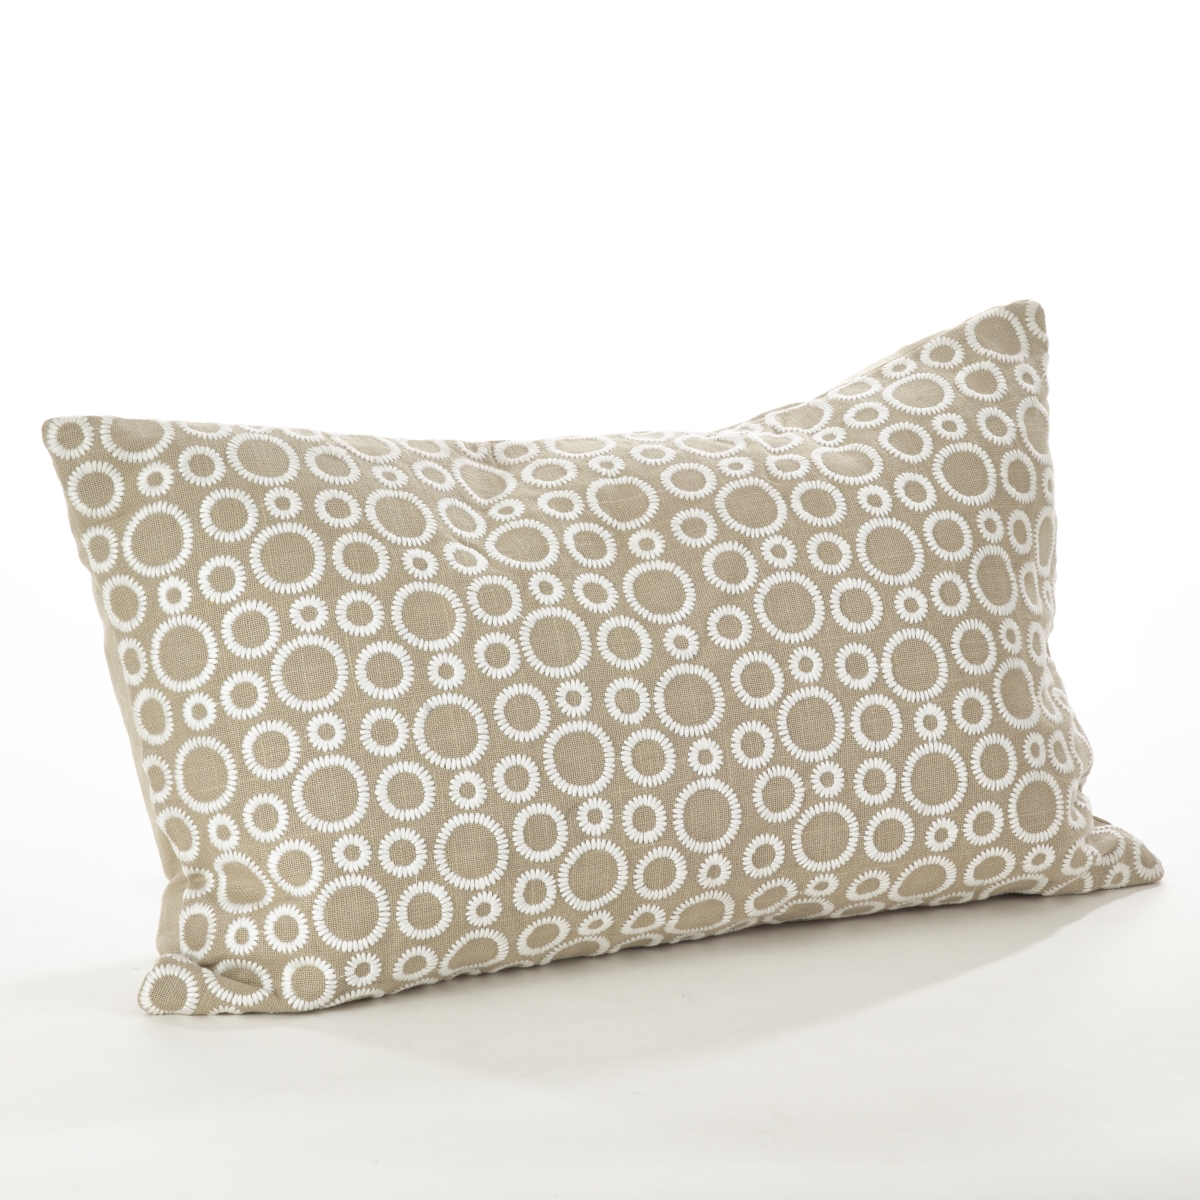 0007.n1423b 14 X 23 In. Embroidered Design Down Filled Cotton Throw Pillow, Natural